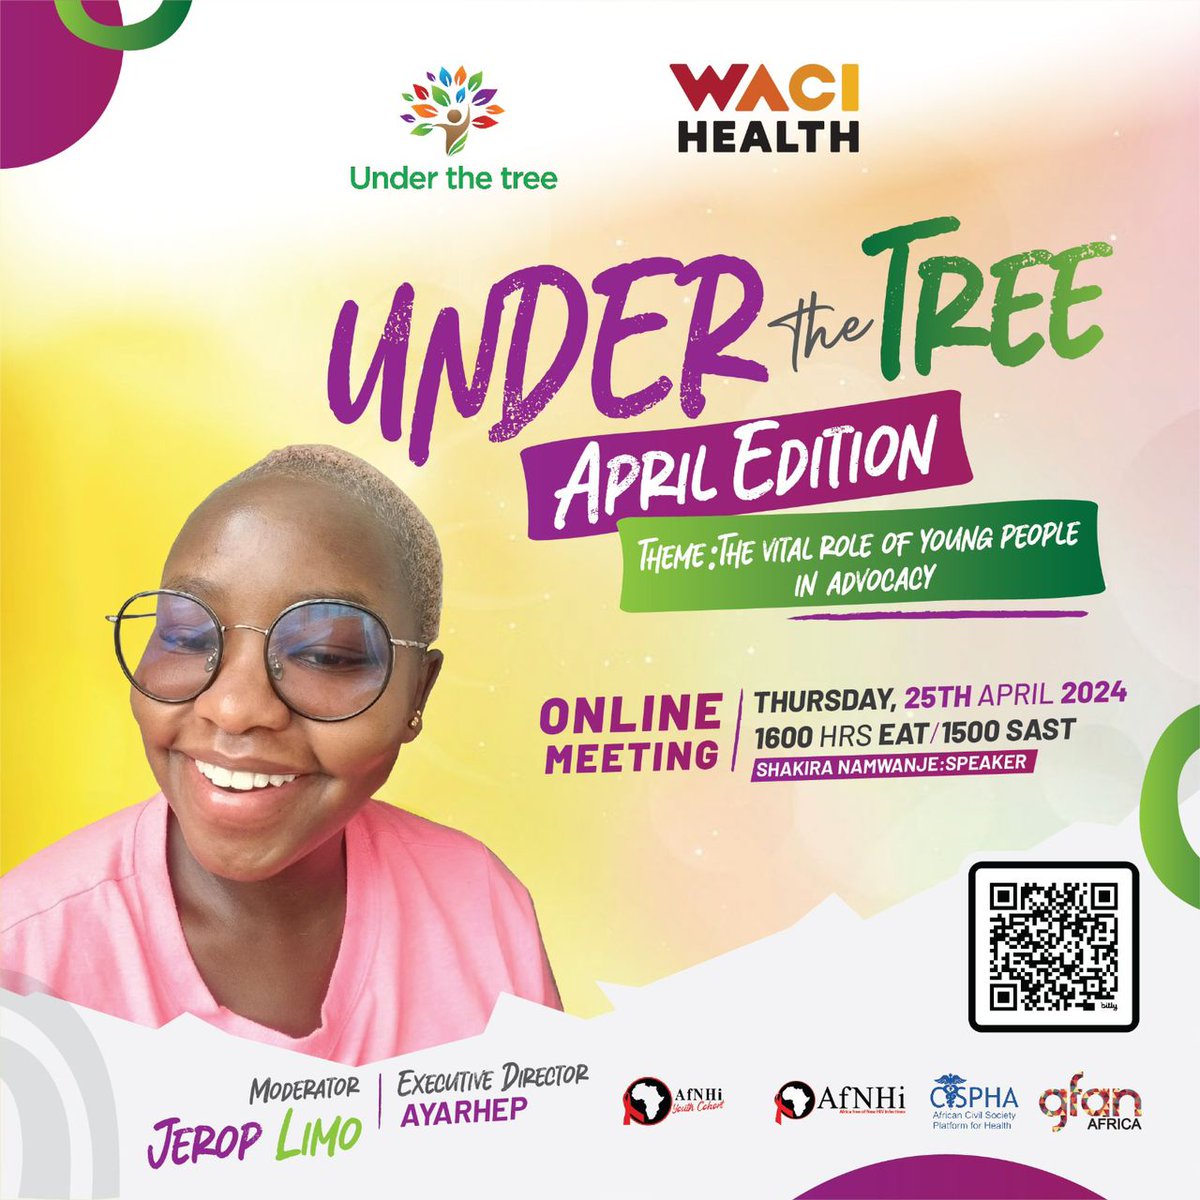 .@WACIHealth Under the Tree April 2024 Edition event. Will be on later today ,moderated by @jerop_limo, Executive Director at @AYARHEP_KENYA. Coming up at - 16:00 Hrs EAT (East Africa Time) Register here: us02web.zoom.us/meeting/regist…